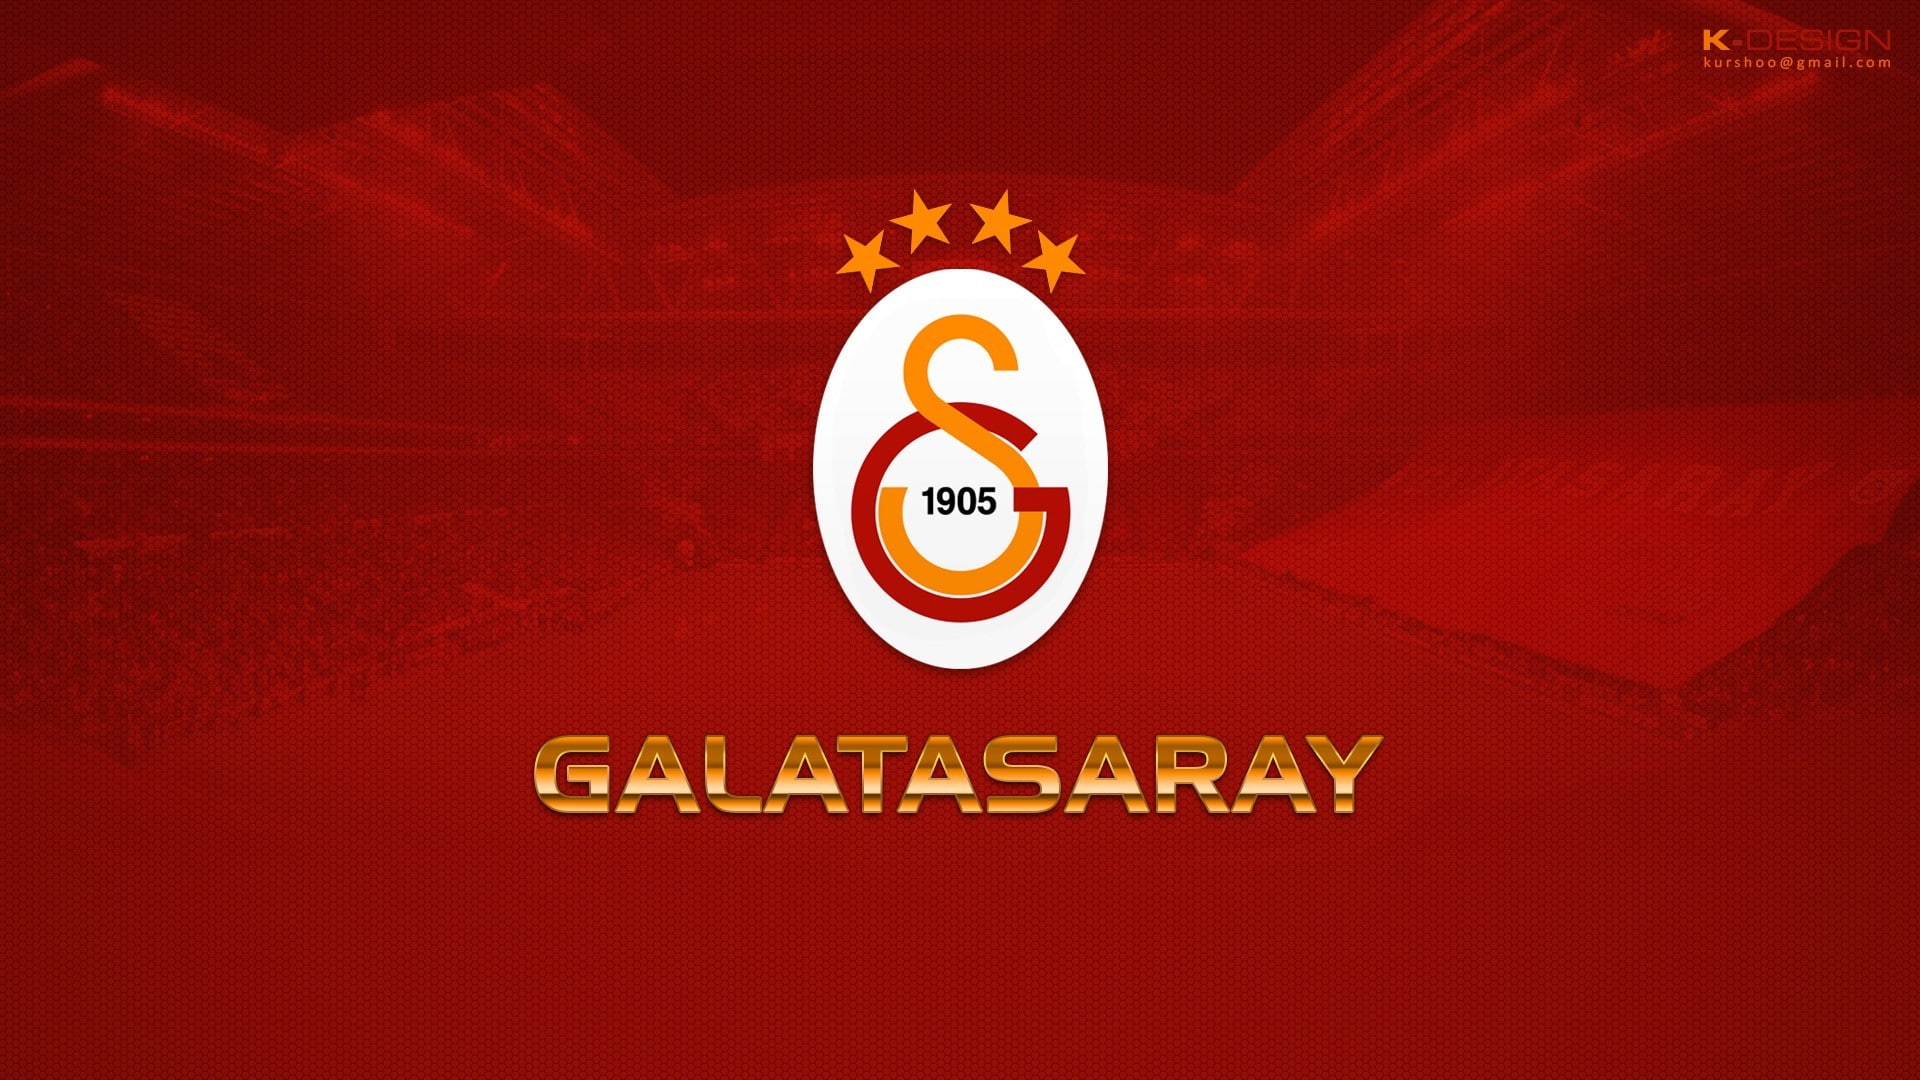 galatasaray sk_ lion soccer clubs, communication, text, sign